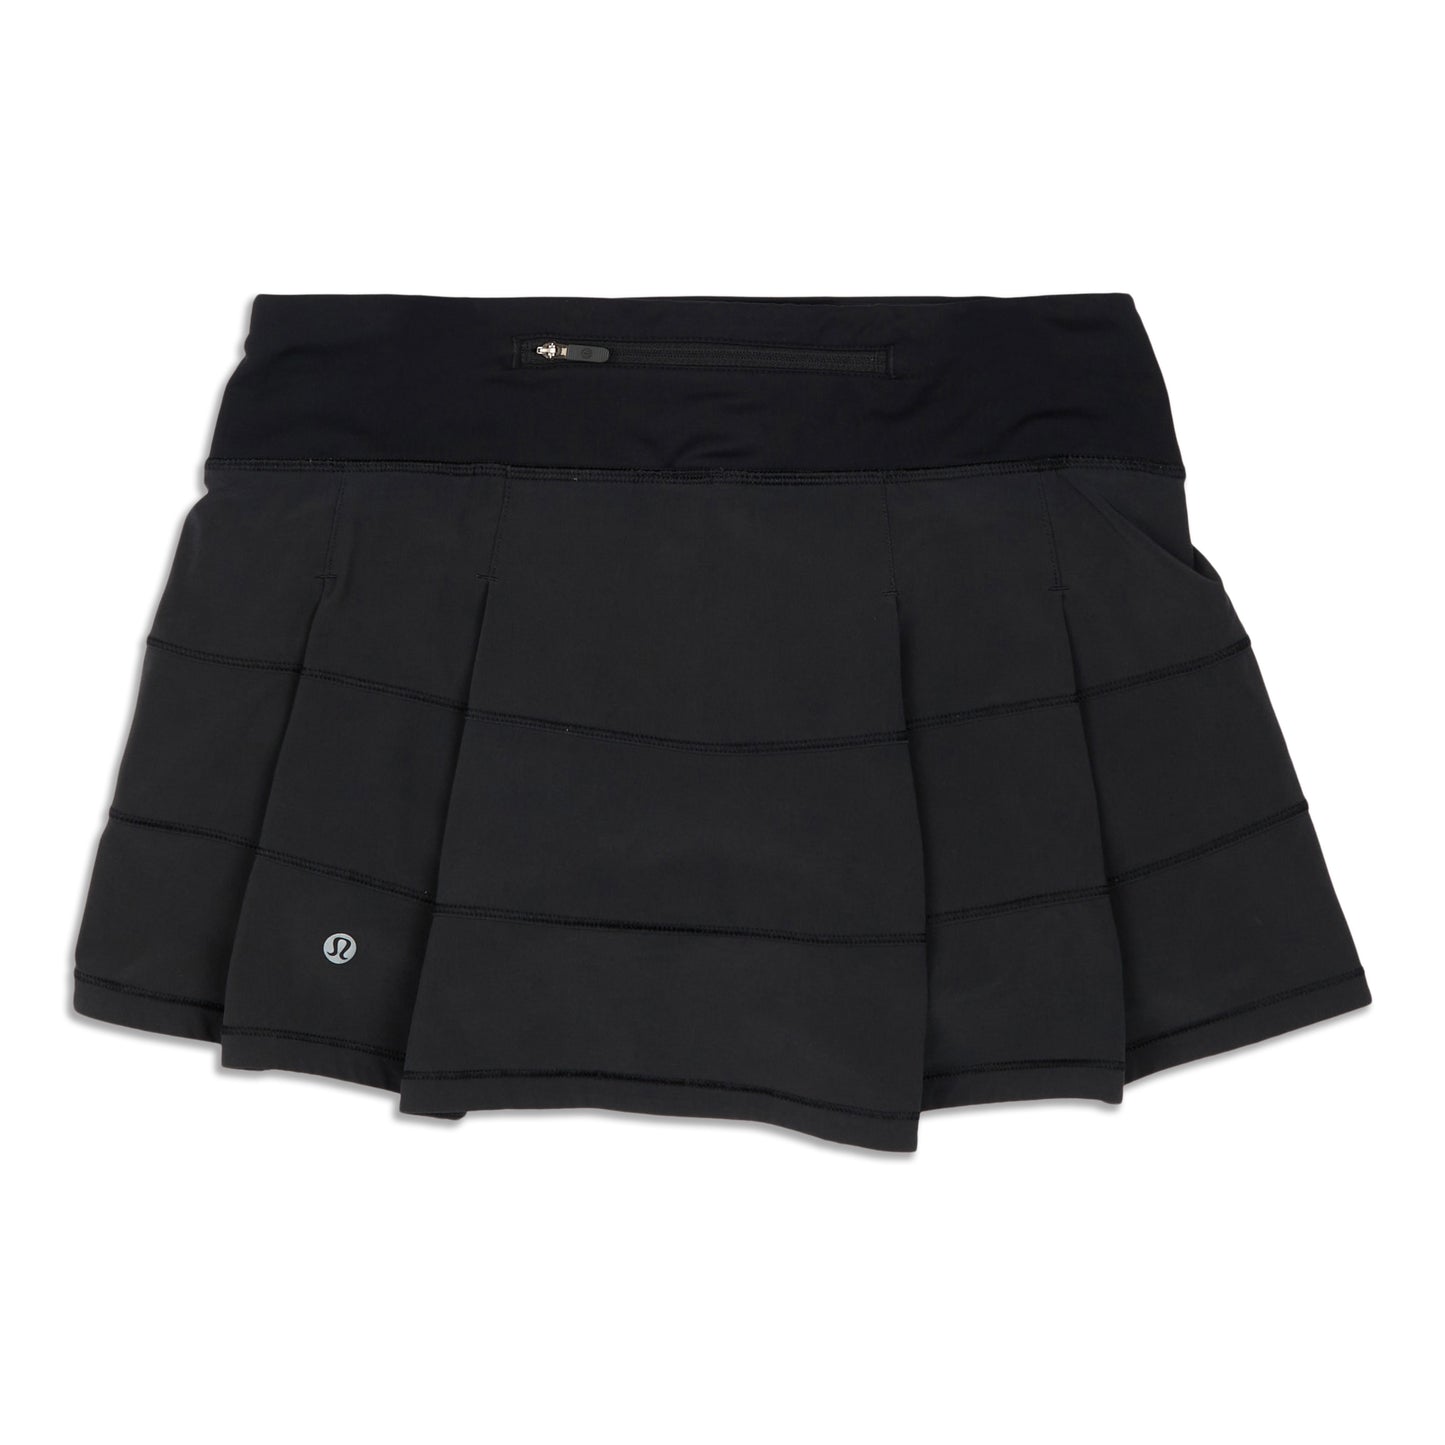 Pace Rival Skirt - Resale